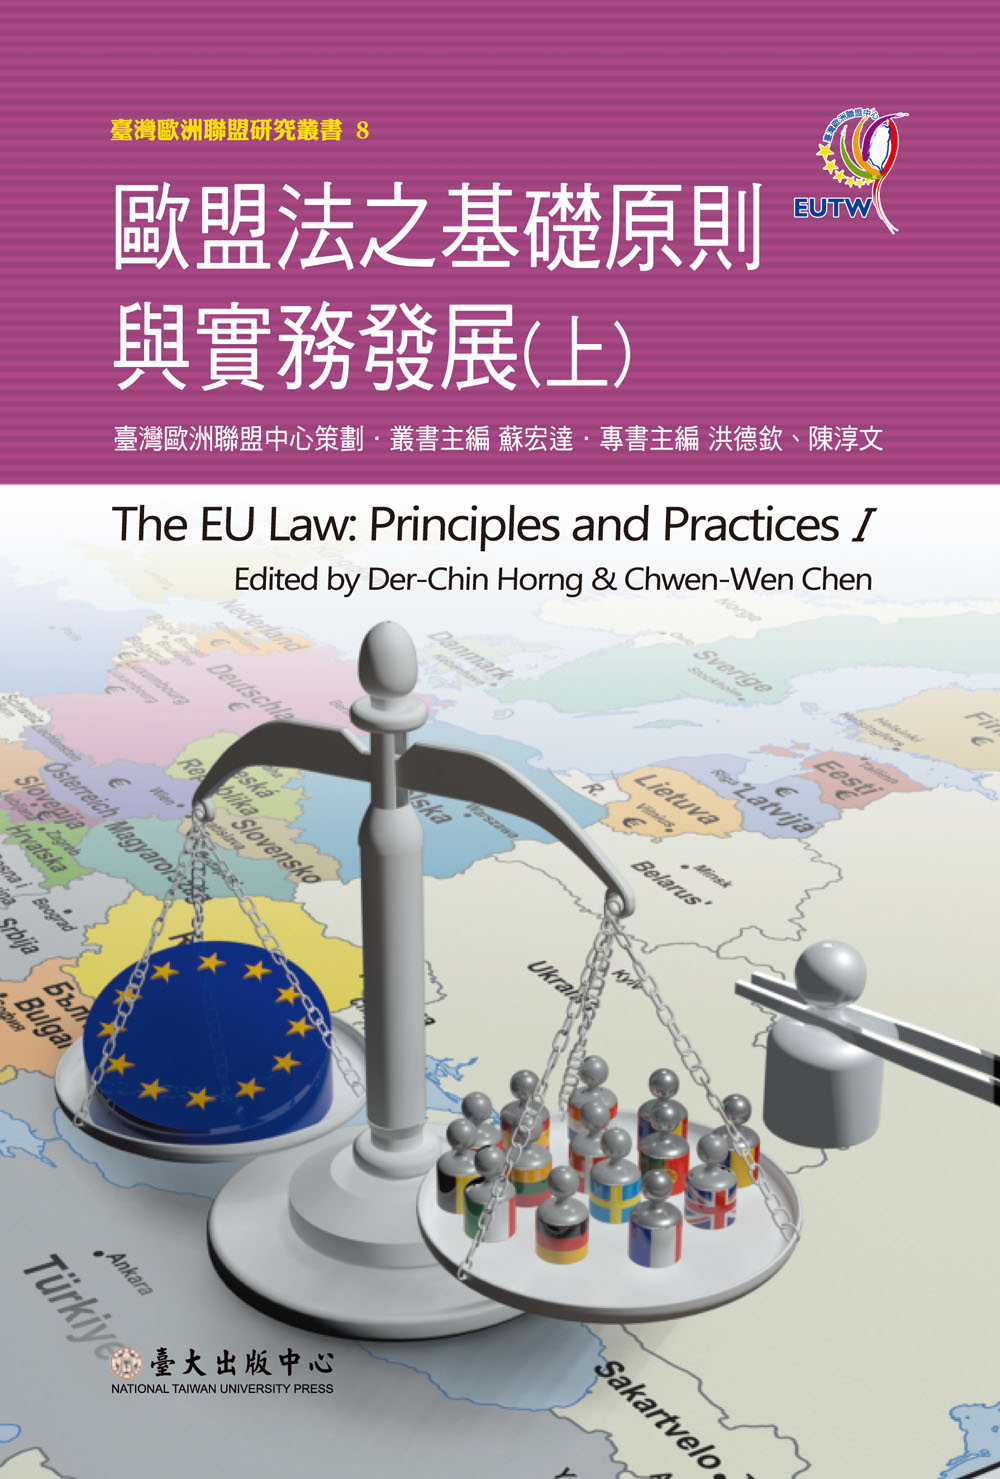 The EU Law: Principles and Practices (Vol. 1)